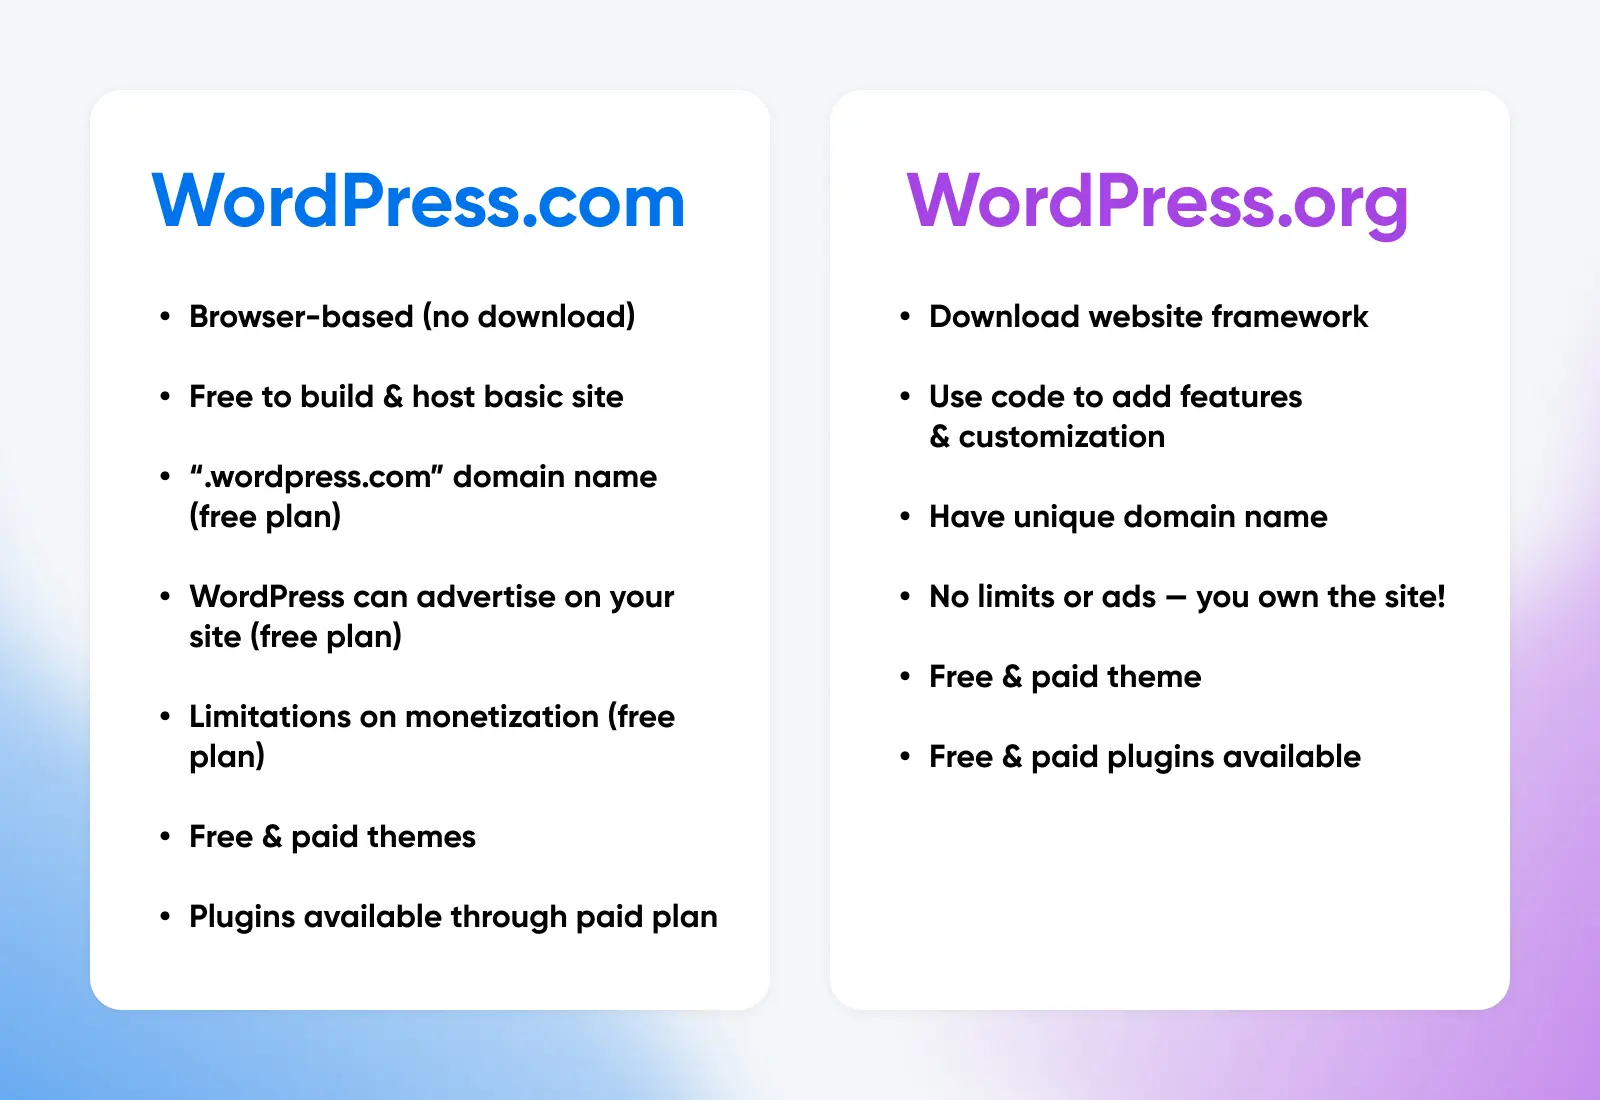 The difference between WordPress.com and WordPress.org